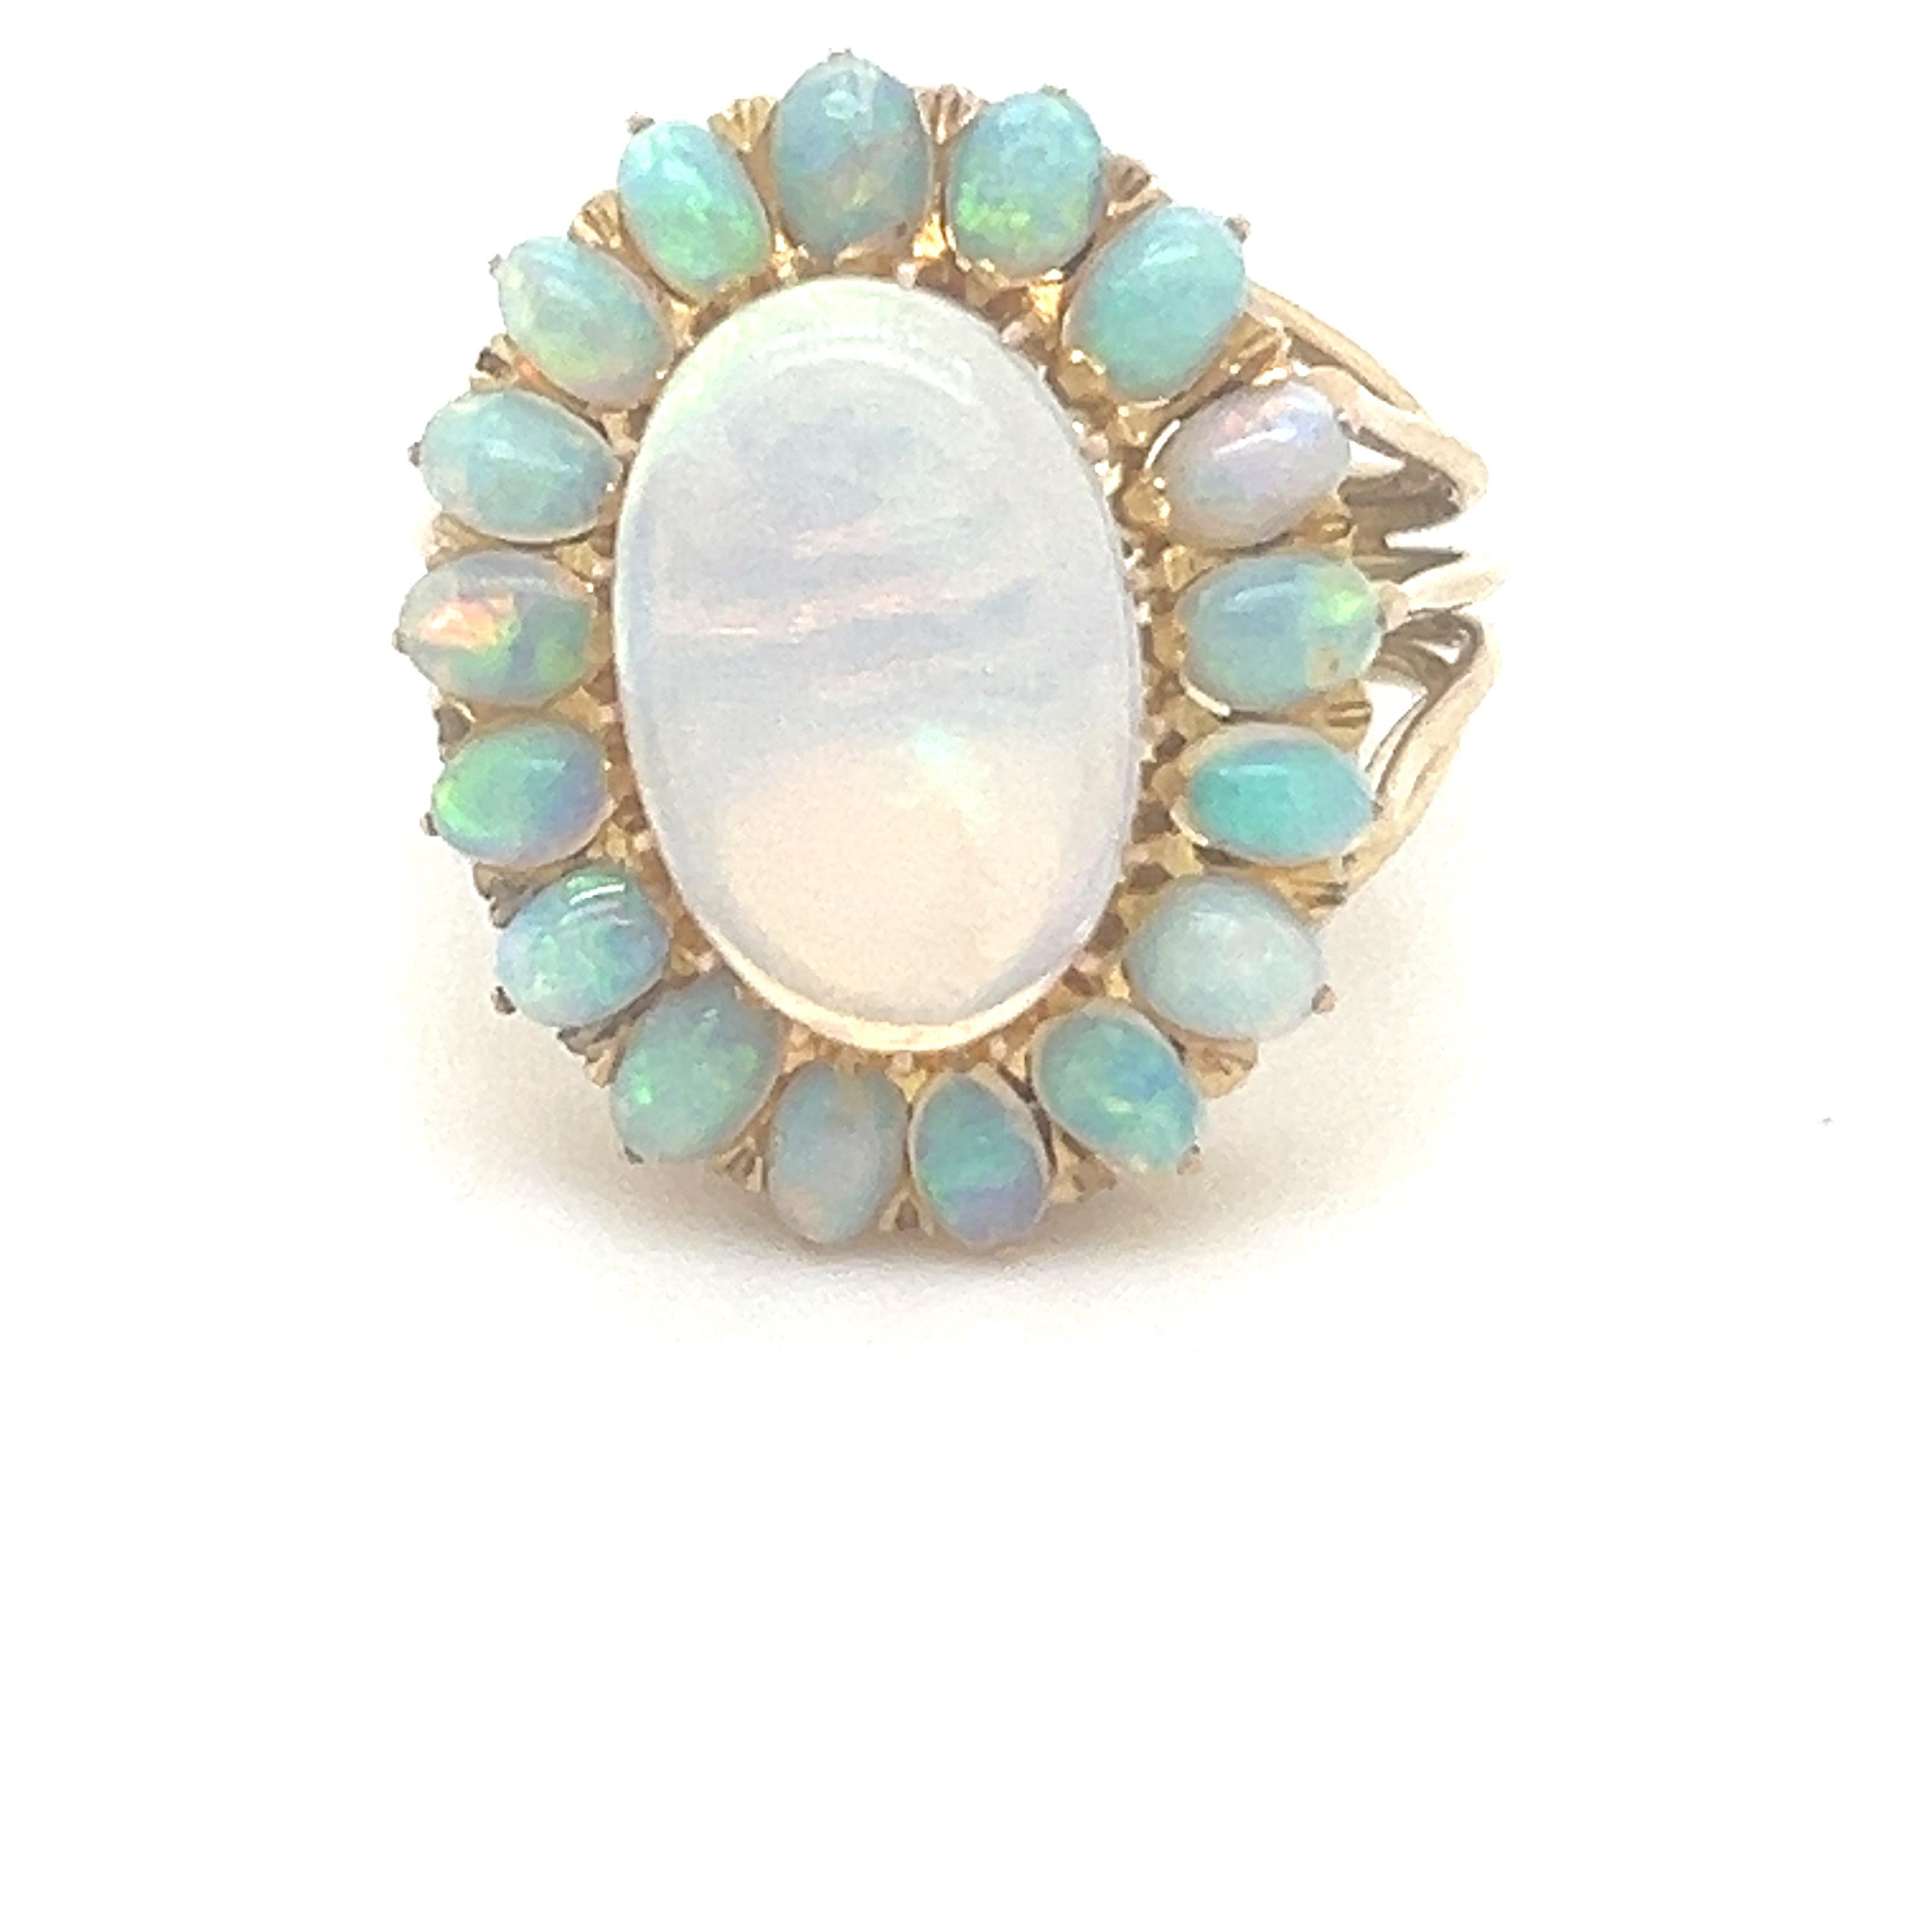 A White Solid Crystal Opal Oval Cluster Ring, with an oval opal claw set in 18ct yellow gold within a border of 17 small oval solid white crystal opals on a five wire band.

Centre Opal 2.00ct (estimated), 13.3 x 9.1 x 2.4mm

Small opals 3.5 x